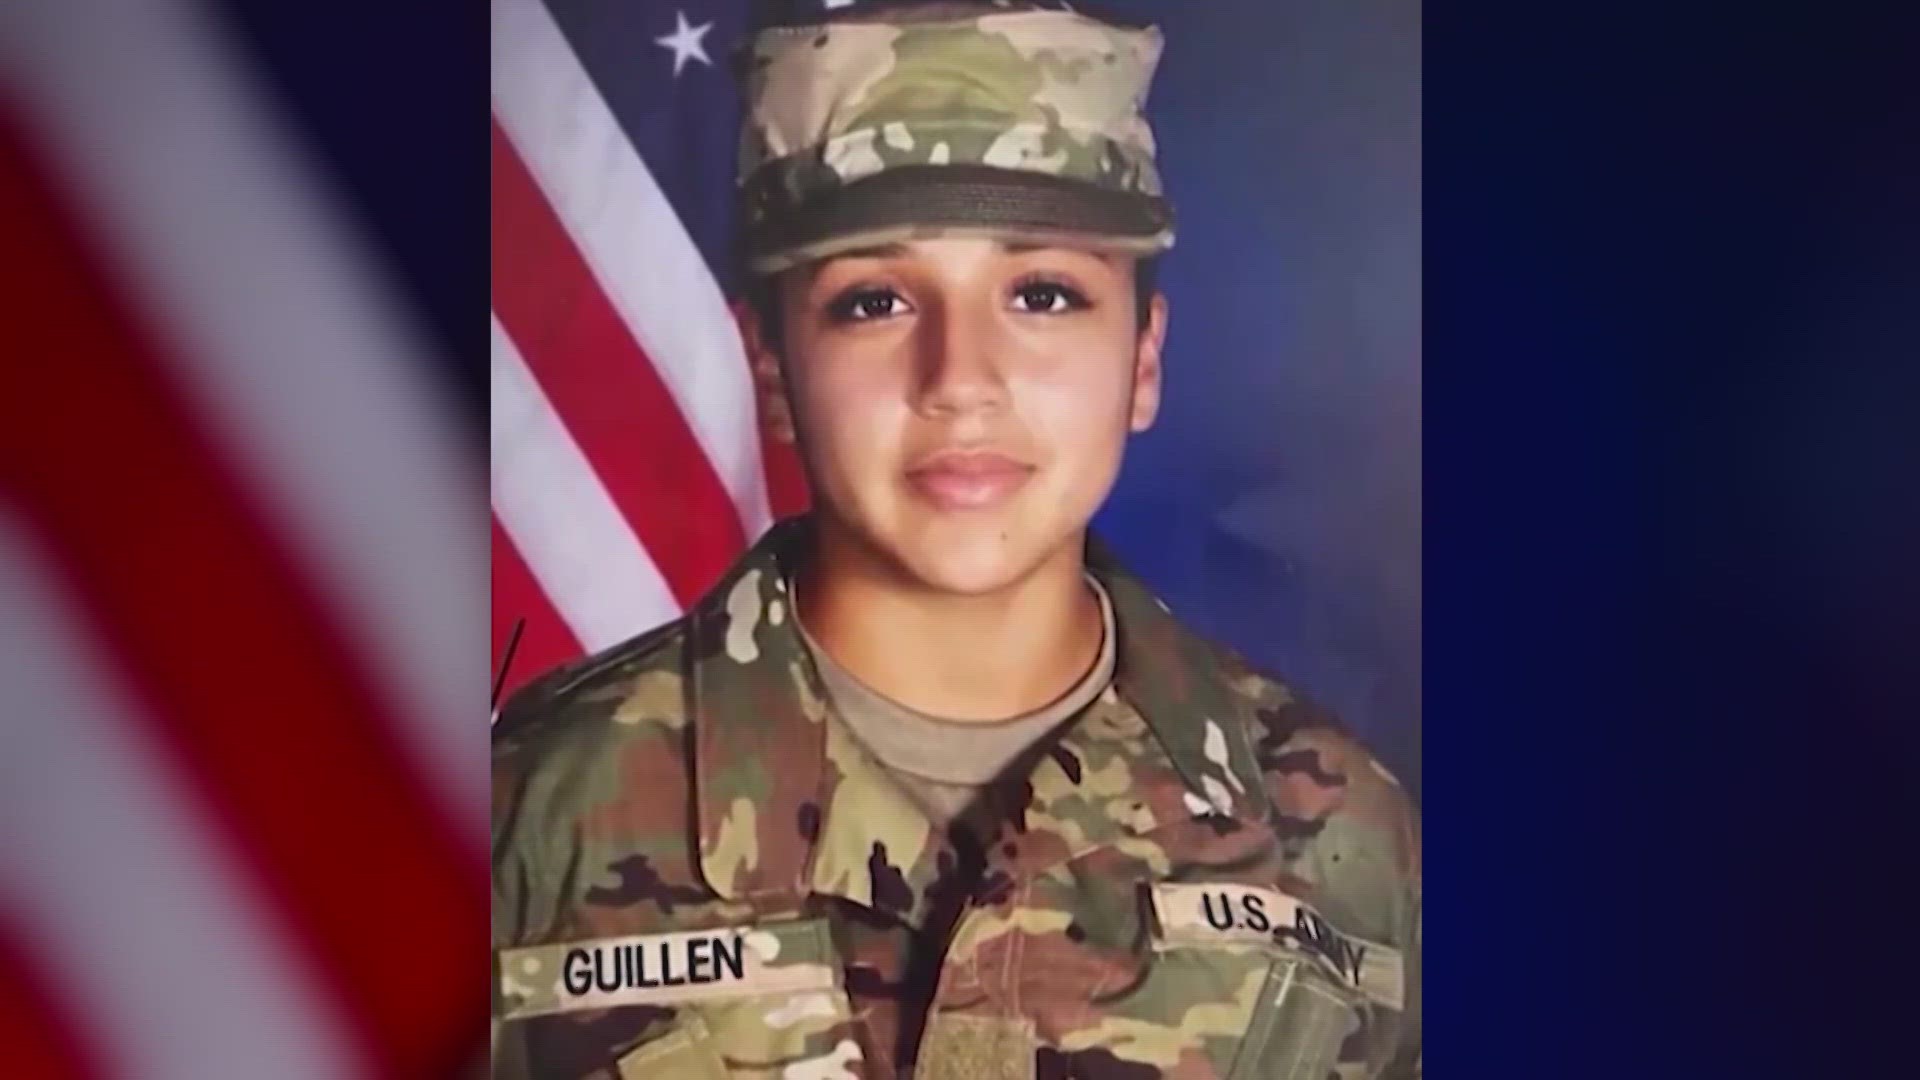 U.S. Army Specialist Vanessa Guillen was murdered in 2020 by another soldier while stationed at Fort Hood.